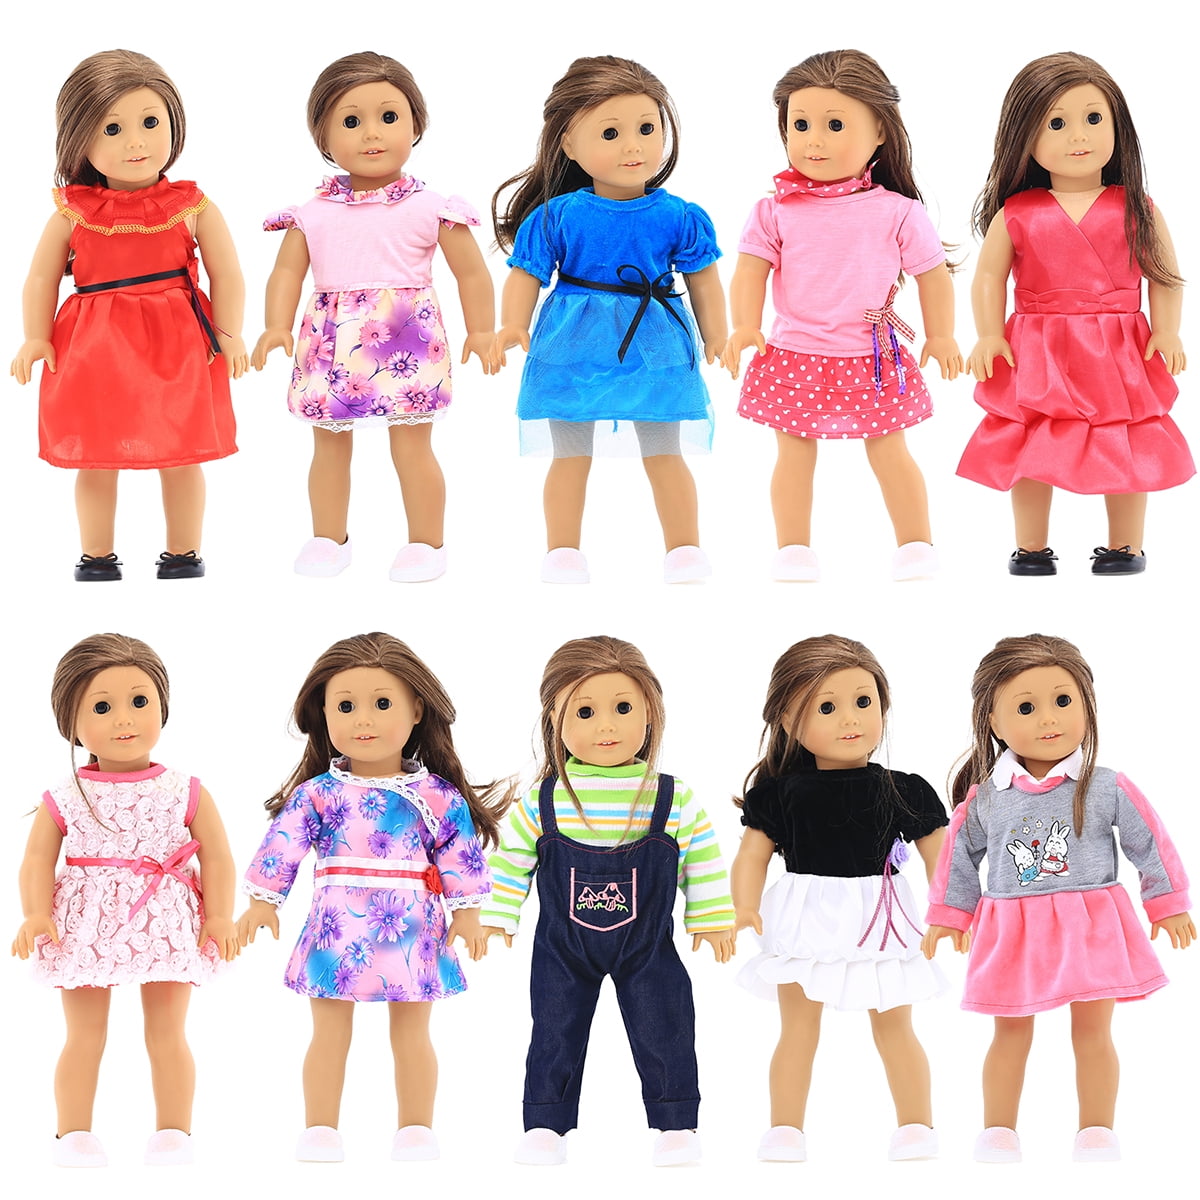 Clothes for 18 inch American Doll Generation Doll Dress Skirt Outfits Shirt 